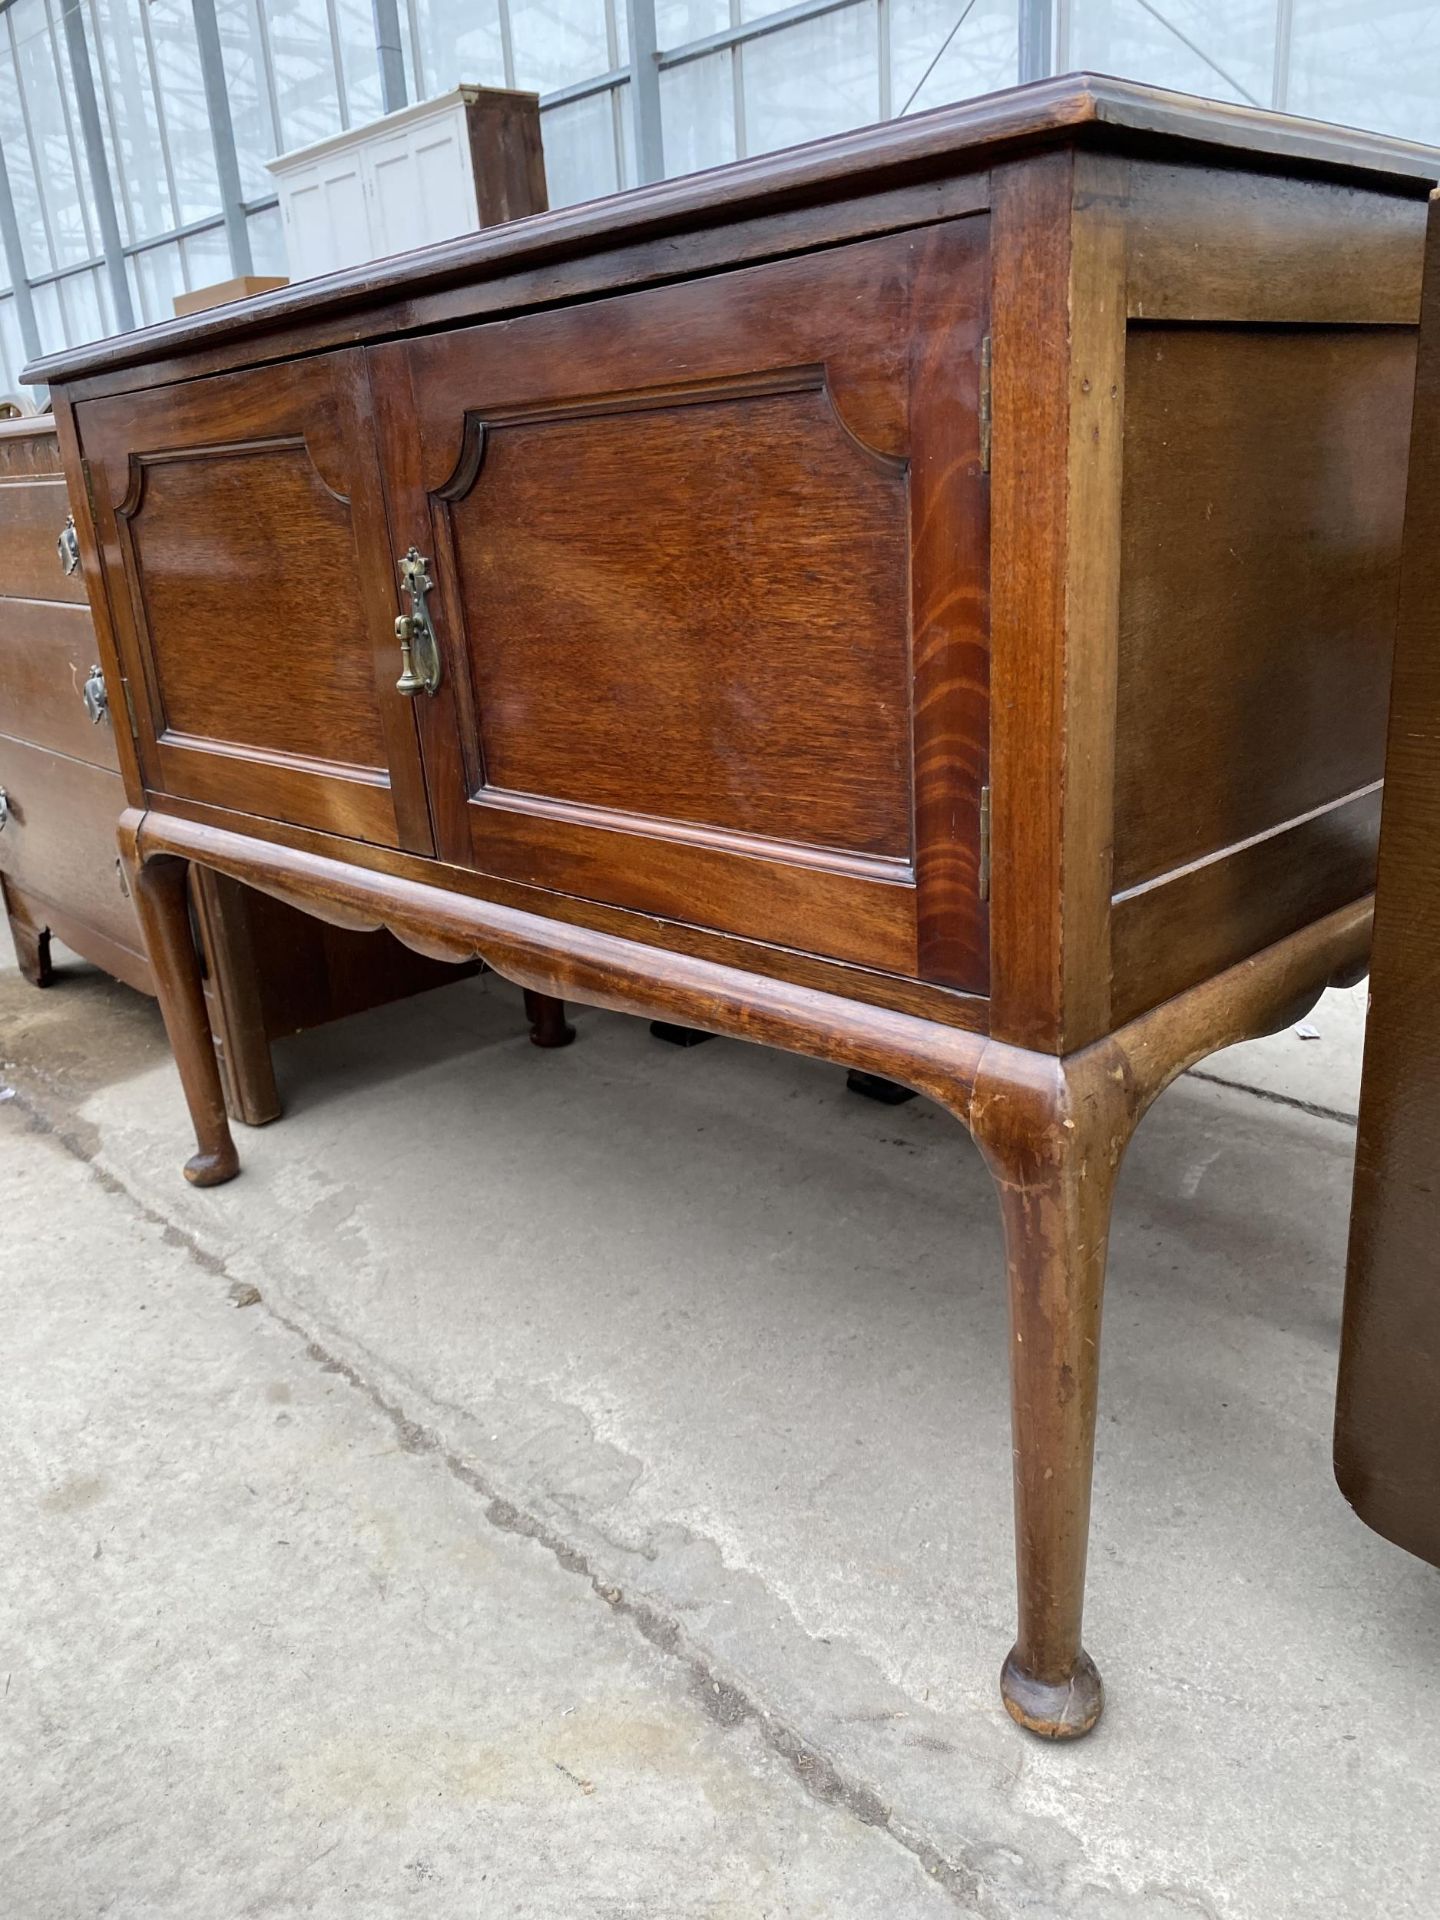 AN EDWARDIAN MAHOGANY TWO DOOR WASHSTAND, 41" WIDE - Image 4 of 5